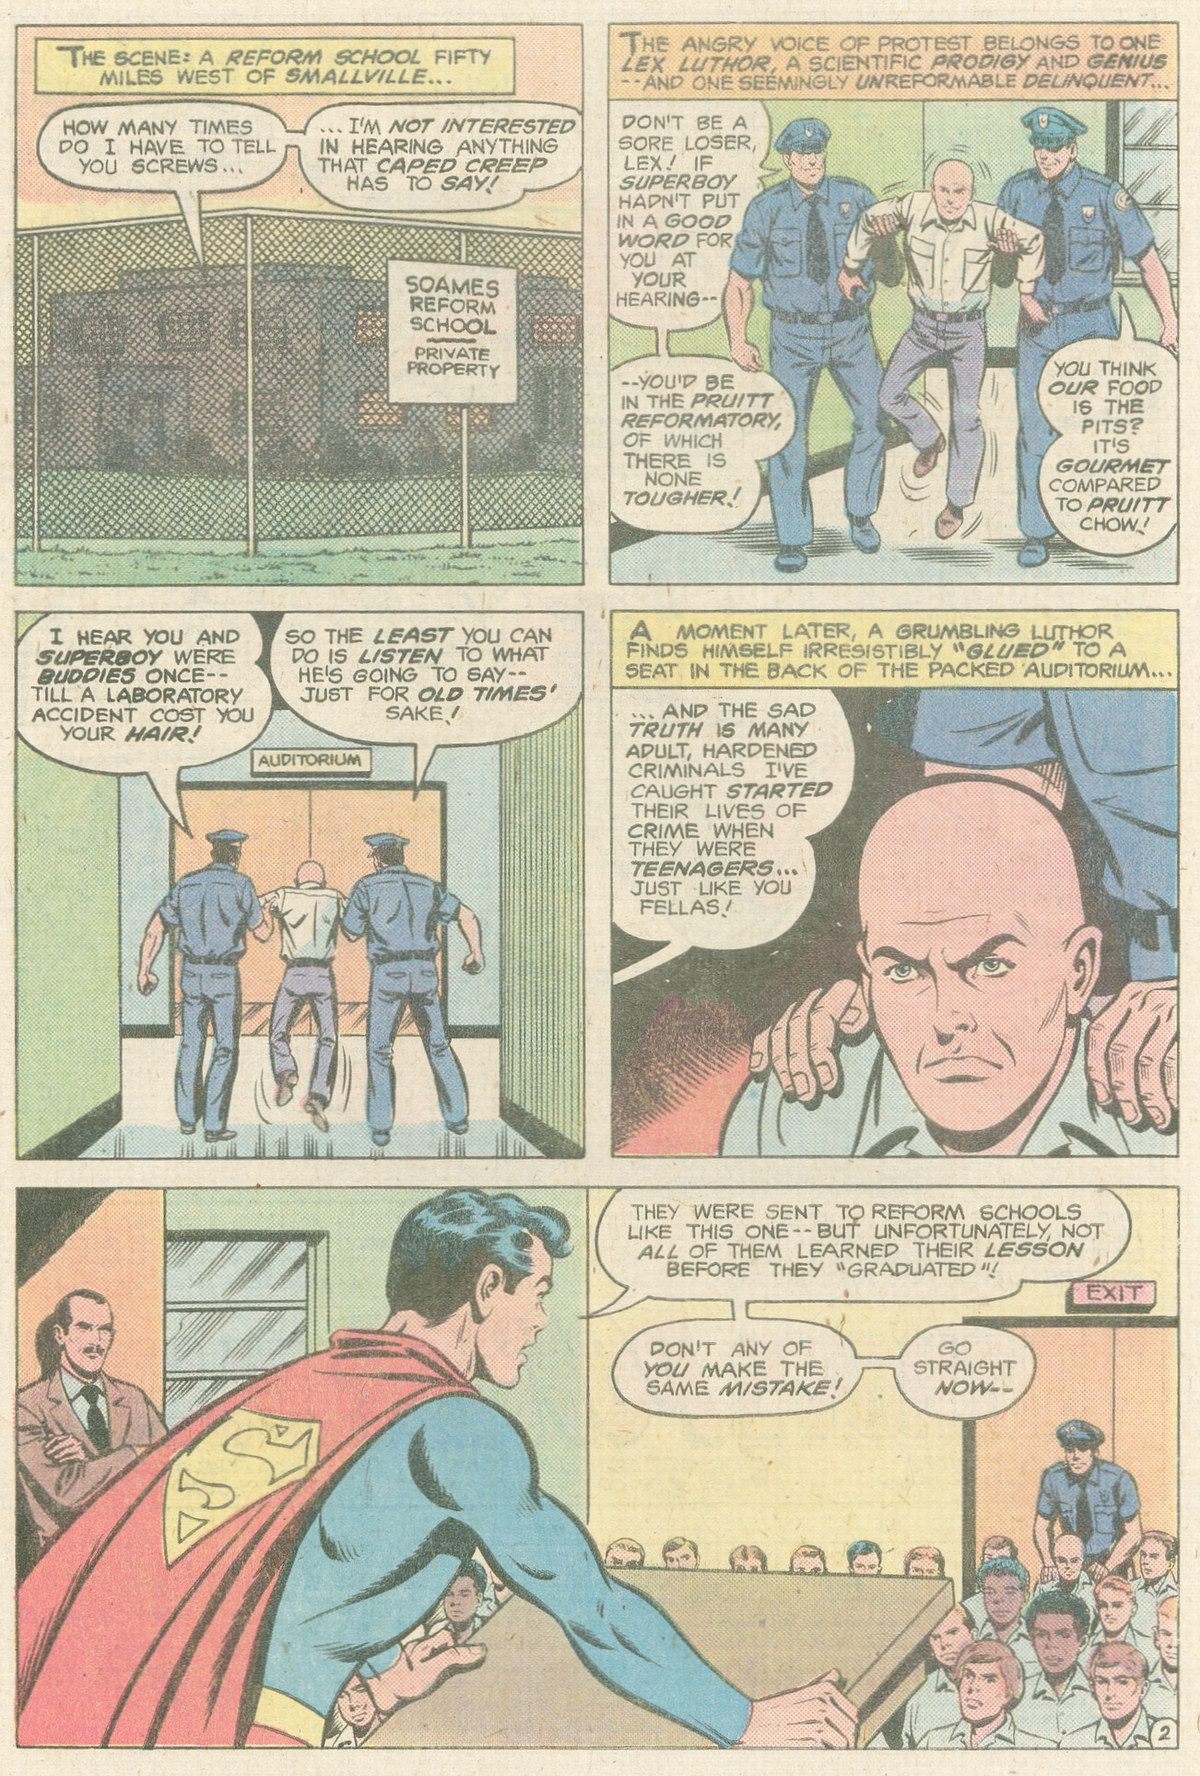 The New Adventures of Superboy 14 Page 2